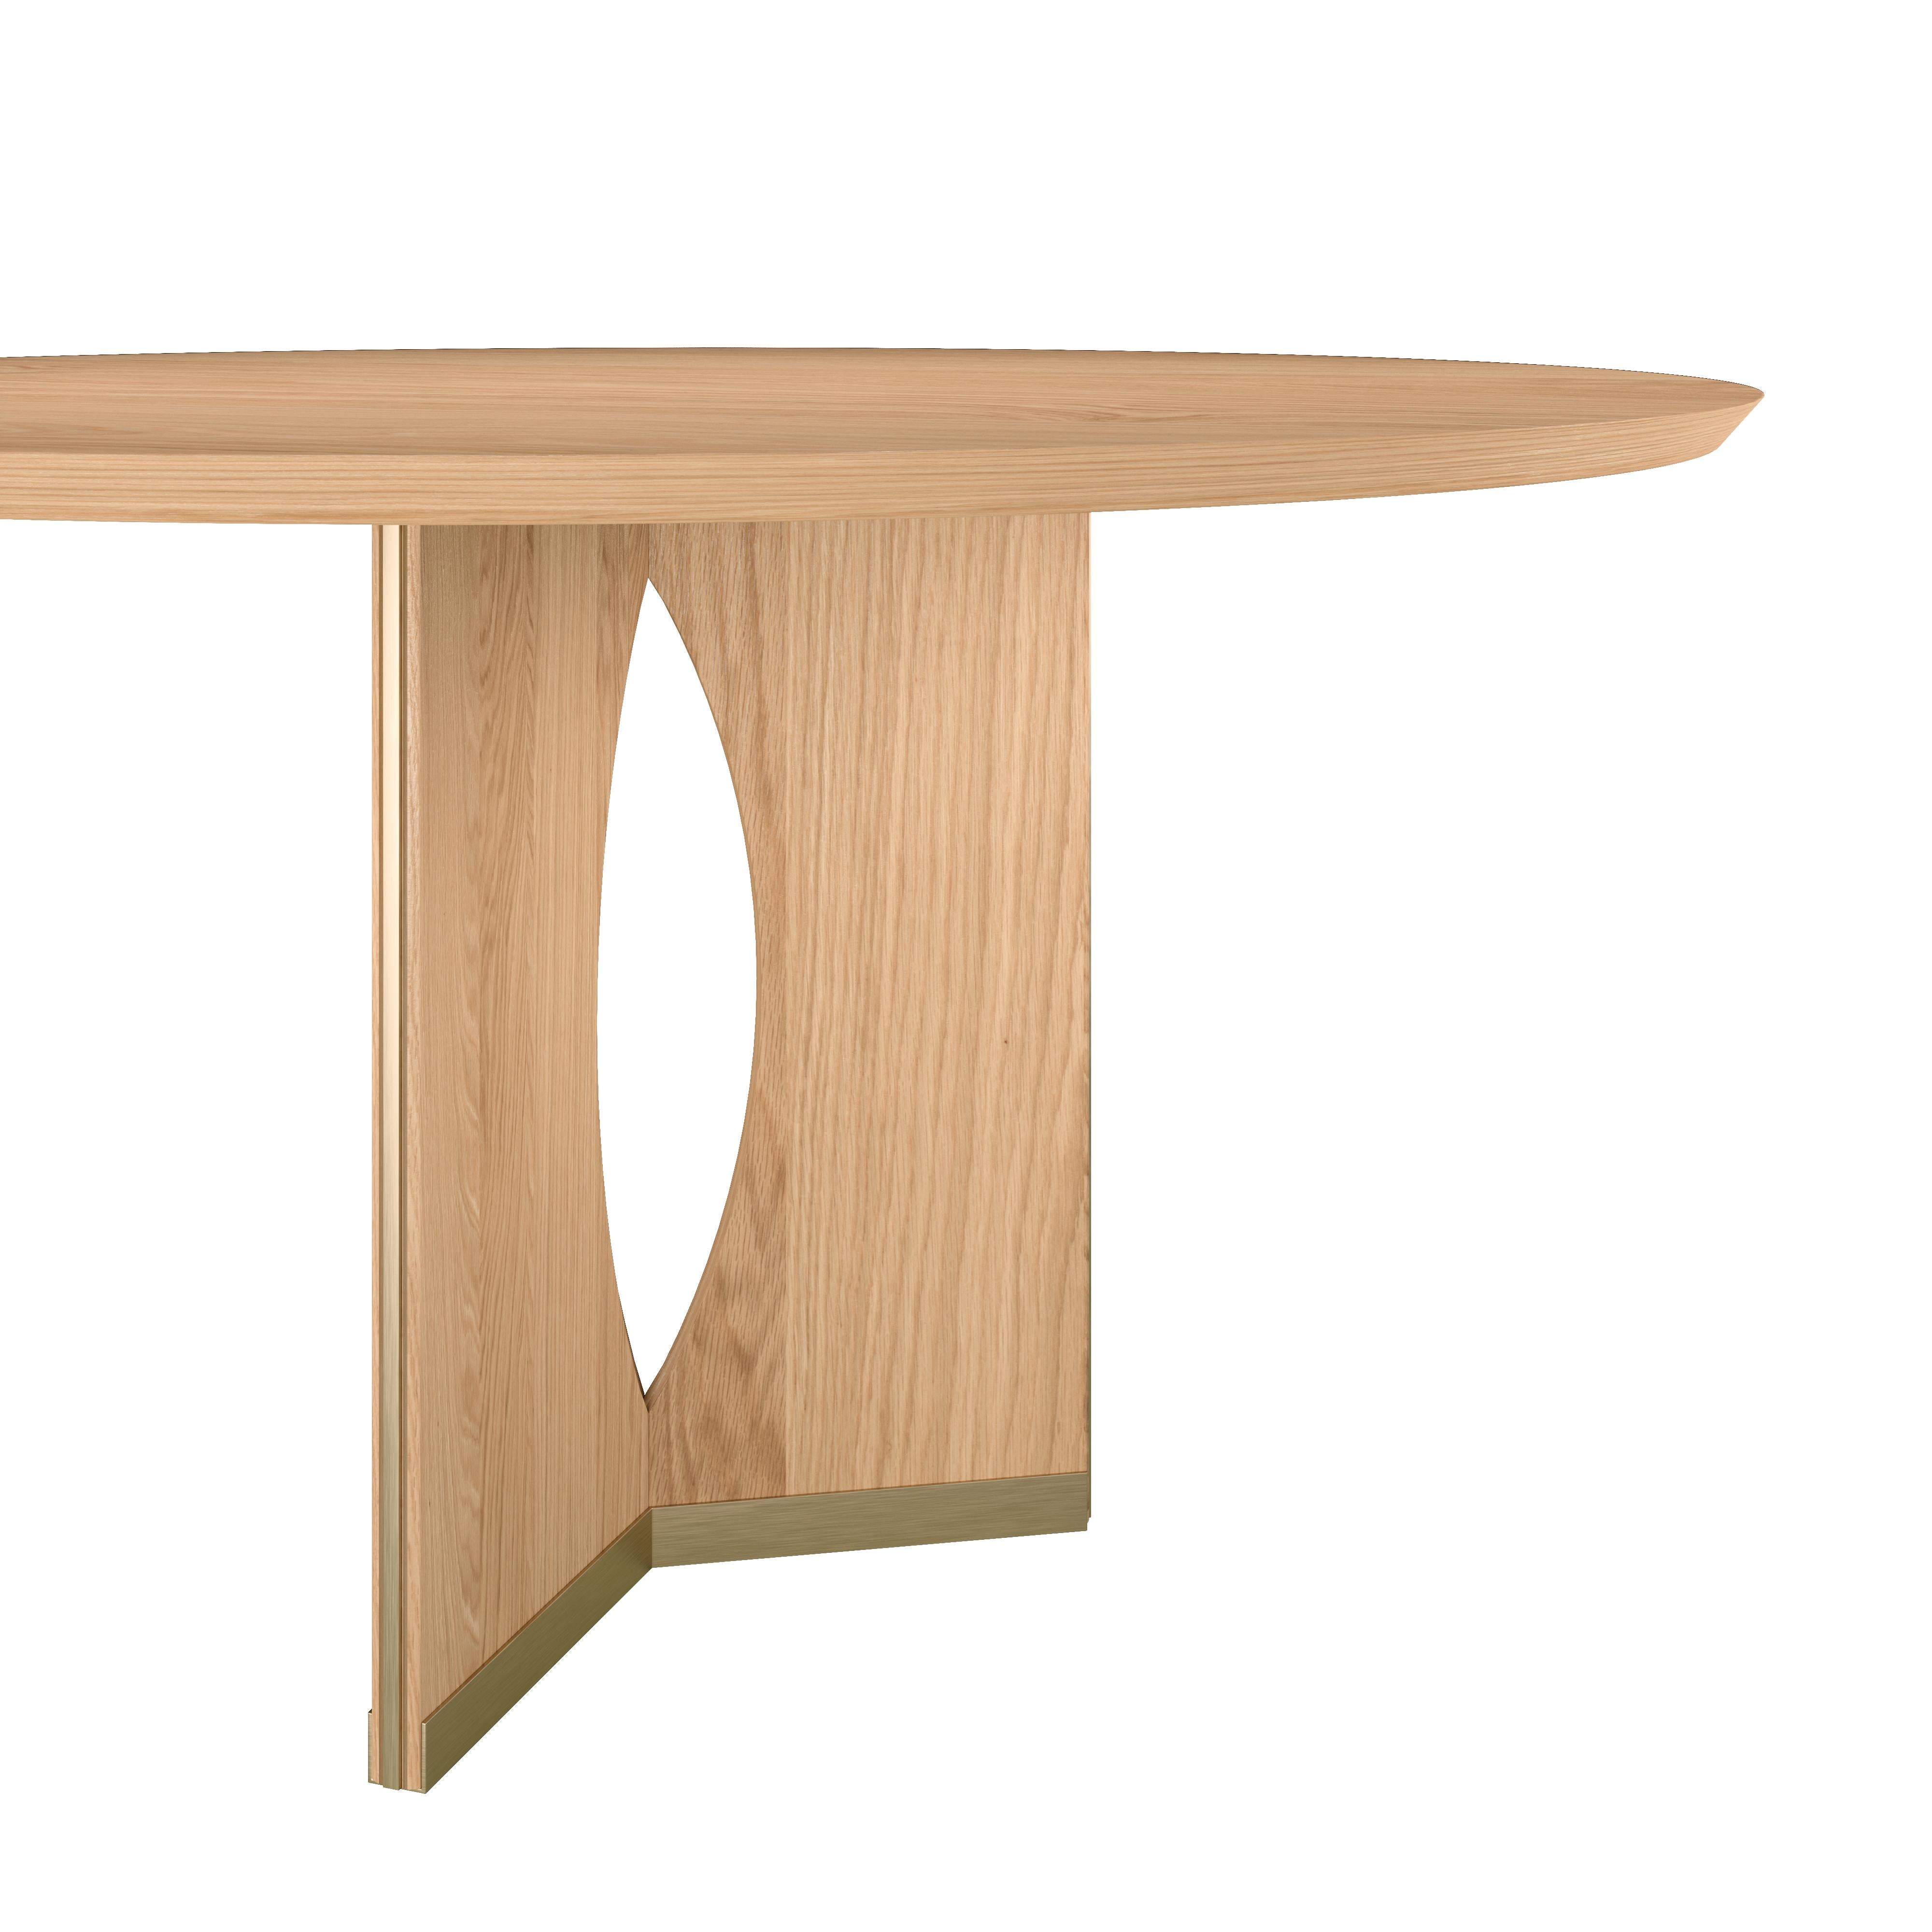 Laiton 21st Century A Taylor Round Dining Table Walnut Wood en vente